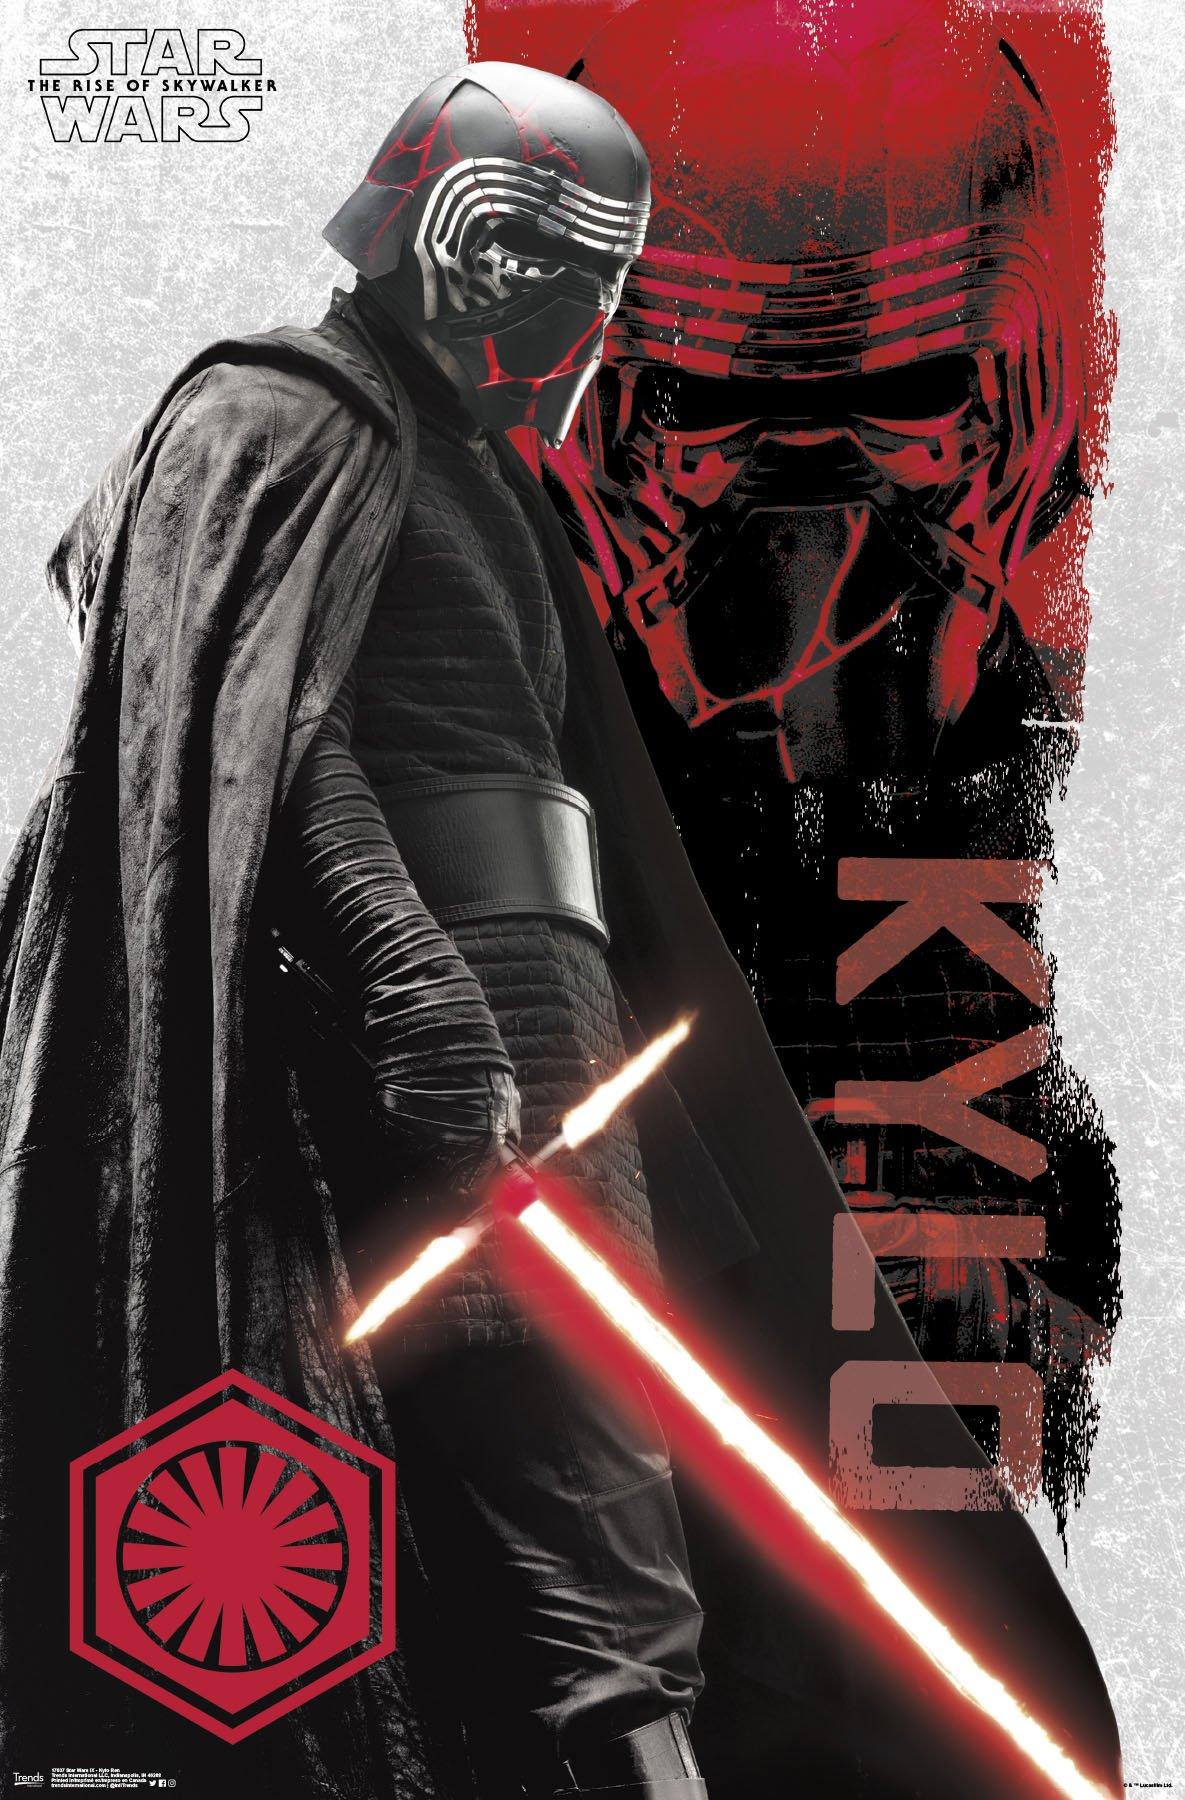 STAR WARS: THE RISE OF SKYWALKER And THE MANDALORIAN Posters